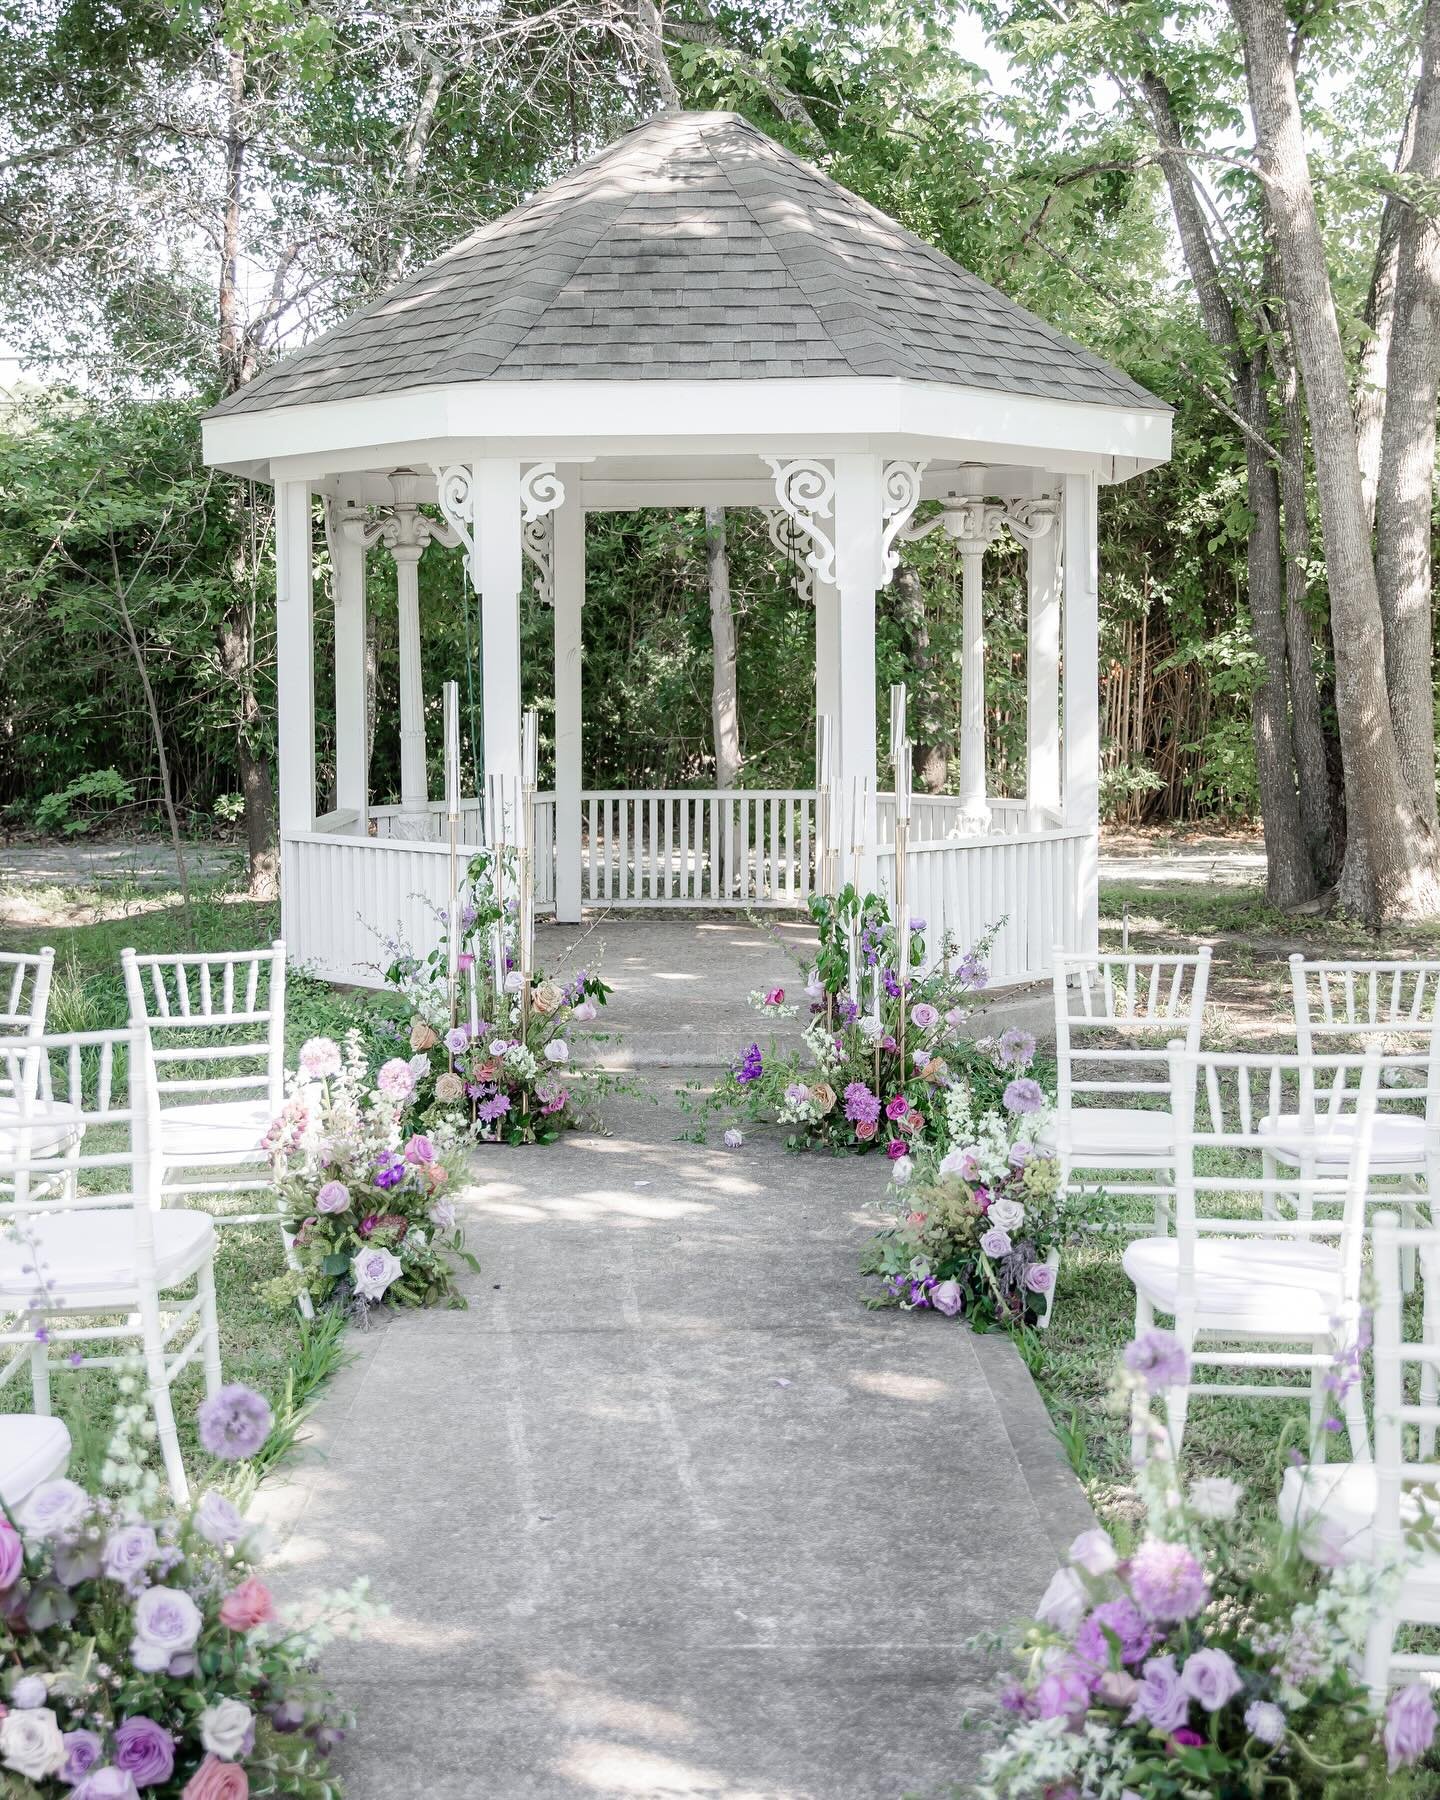 From intimate indoor vows to breathtaking outdoor promises, our venue offers the best of both worlds for your special day. 🌿👰
Planner/Coordinator: @next_chapter_weddings 

Venue: @heavenoneartoaks

Rentals: @next_chapter_weddings

Florals: @wanderi